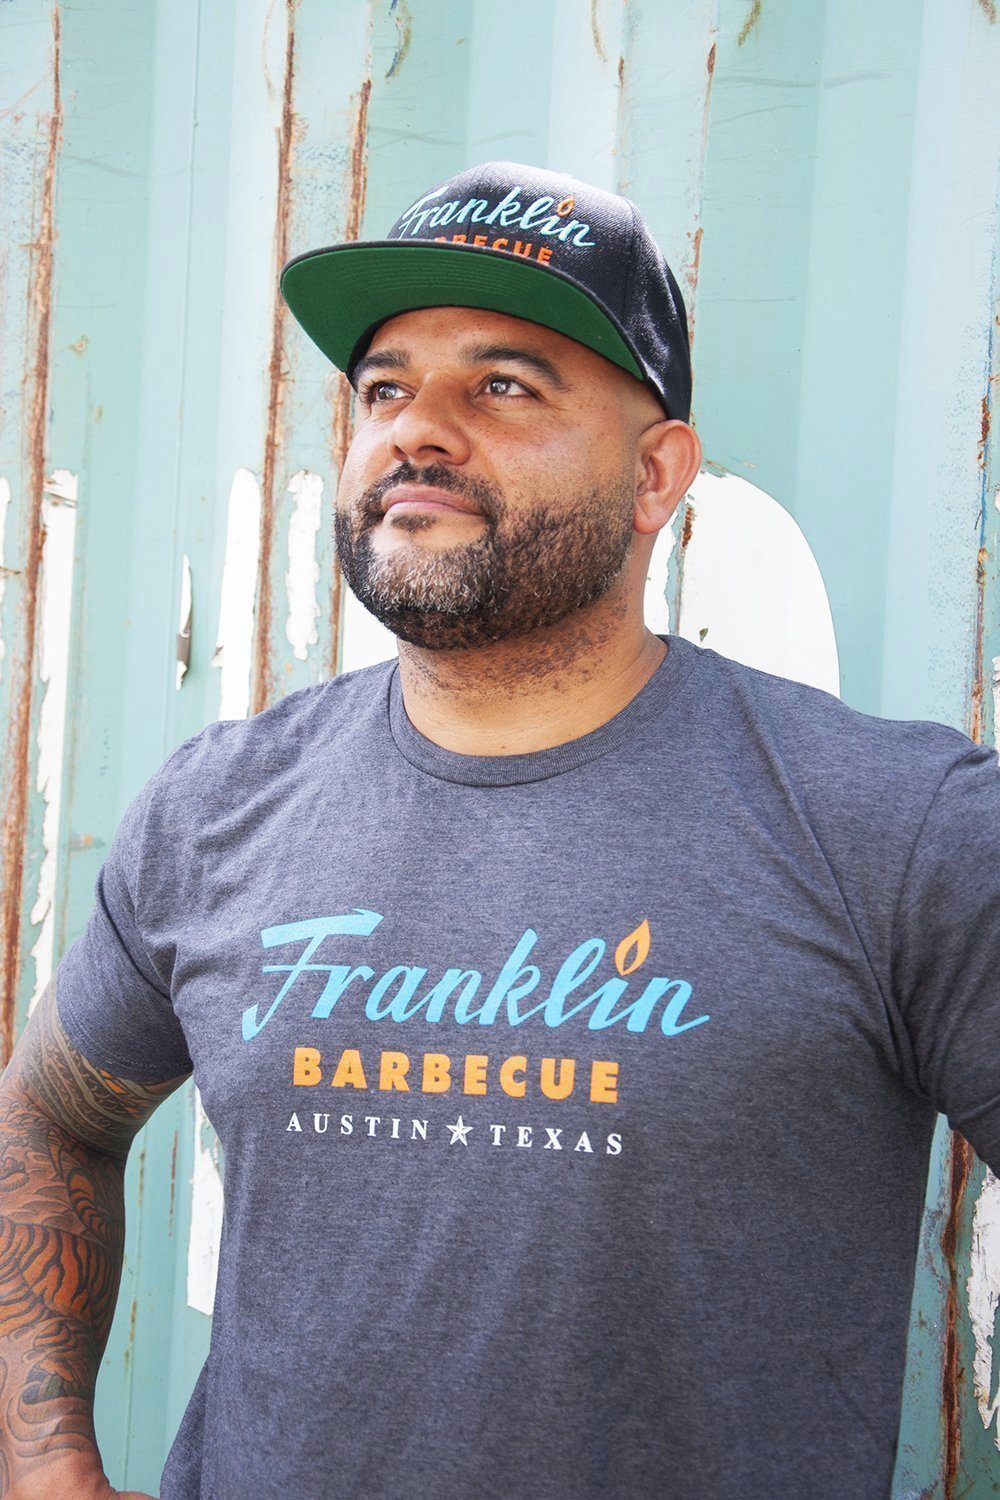 Person modeling Grey t-shirt with Franklin Barbecue text logo in blue and orange. Below that is Austin Texas in white.